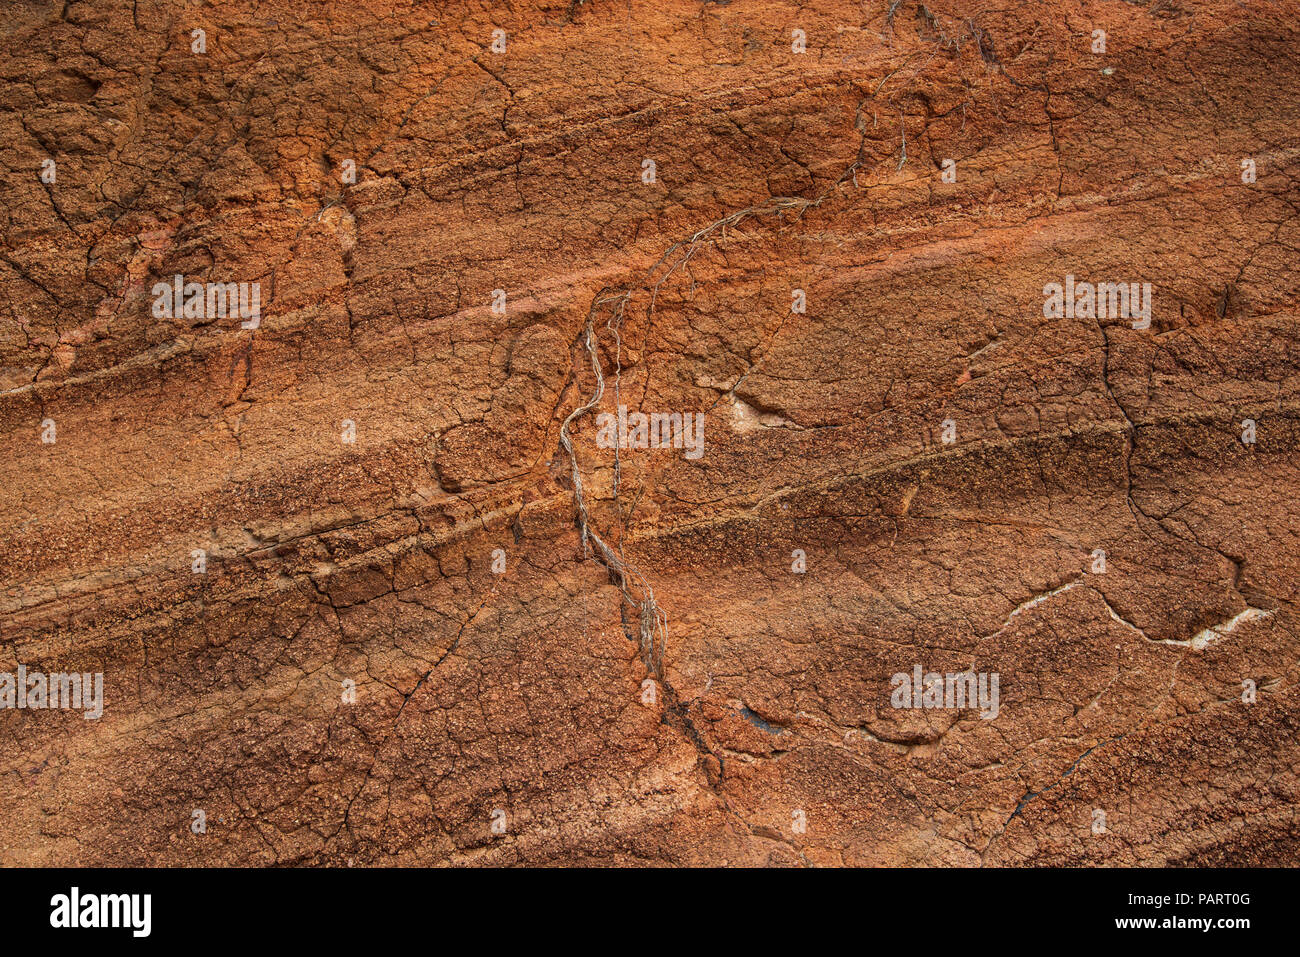 Red soil texture Stock Photo